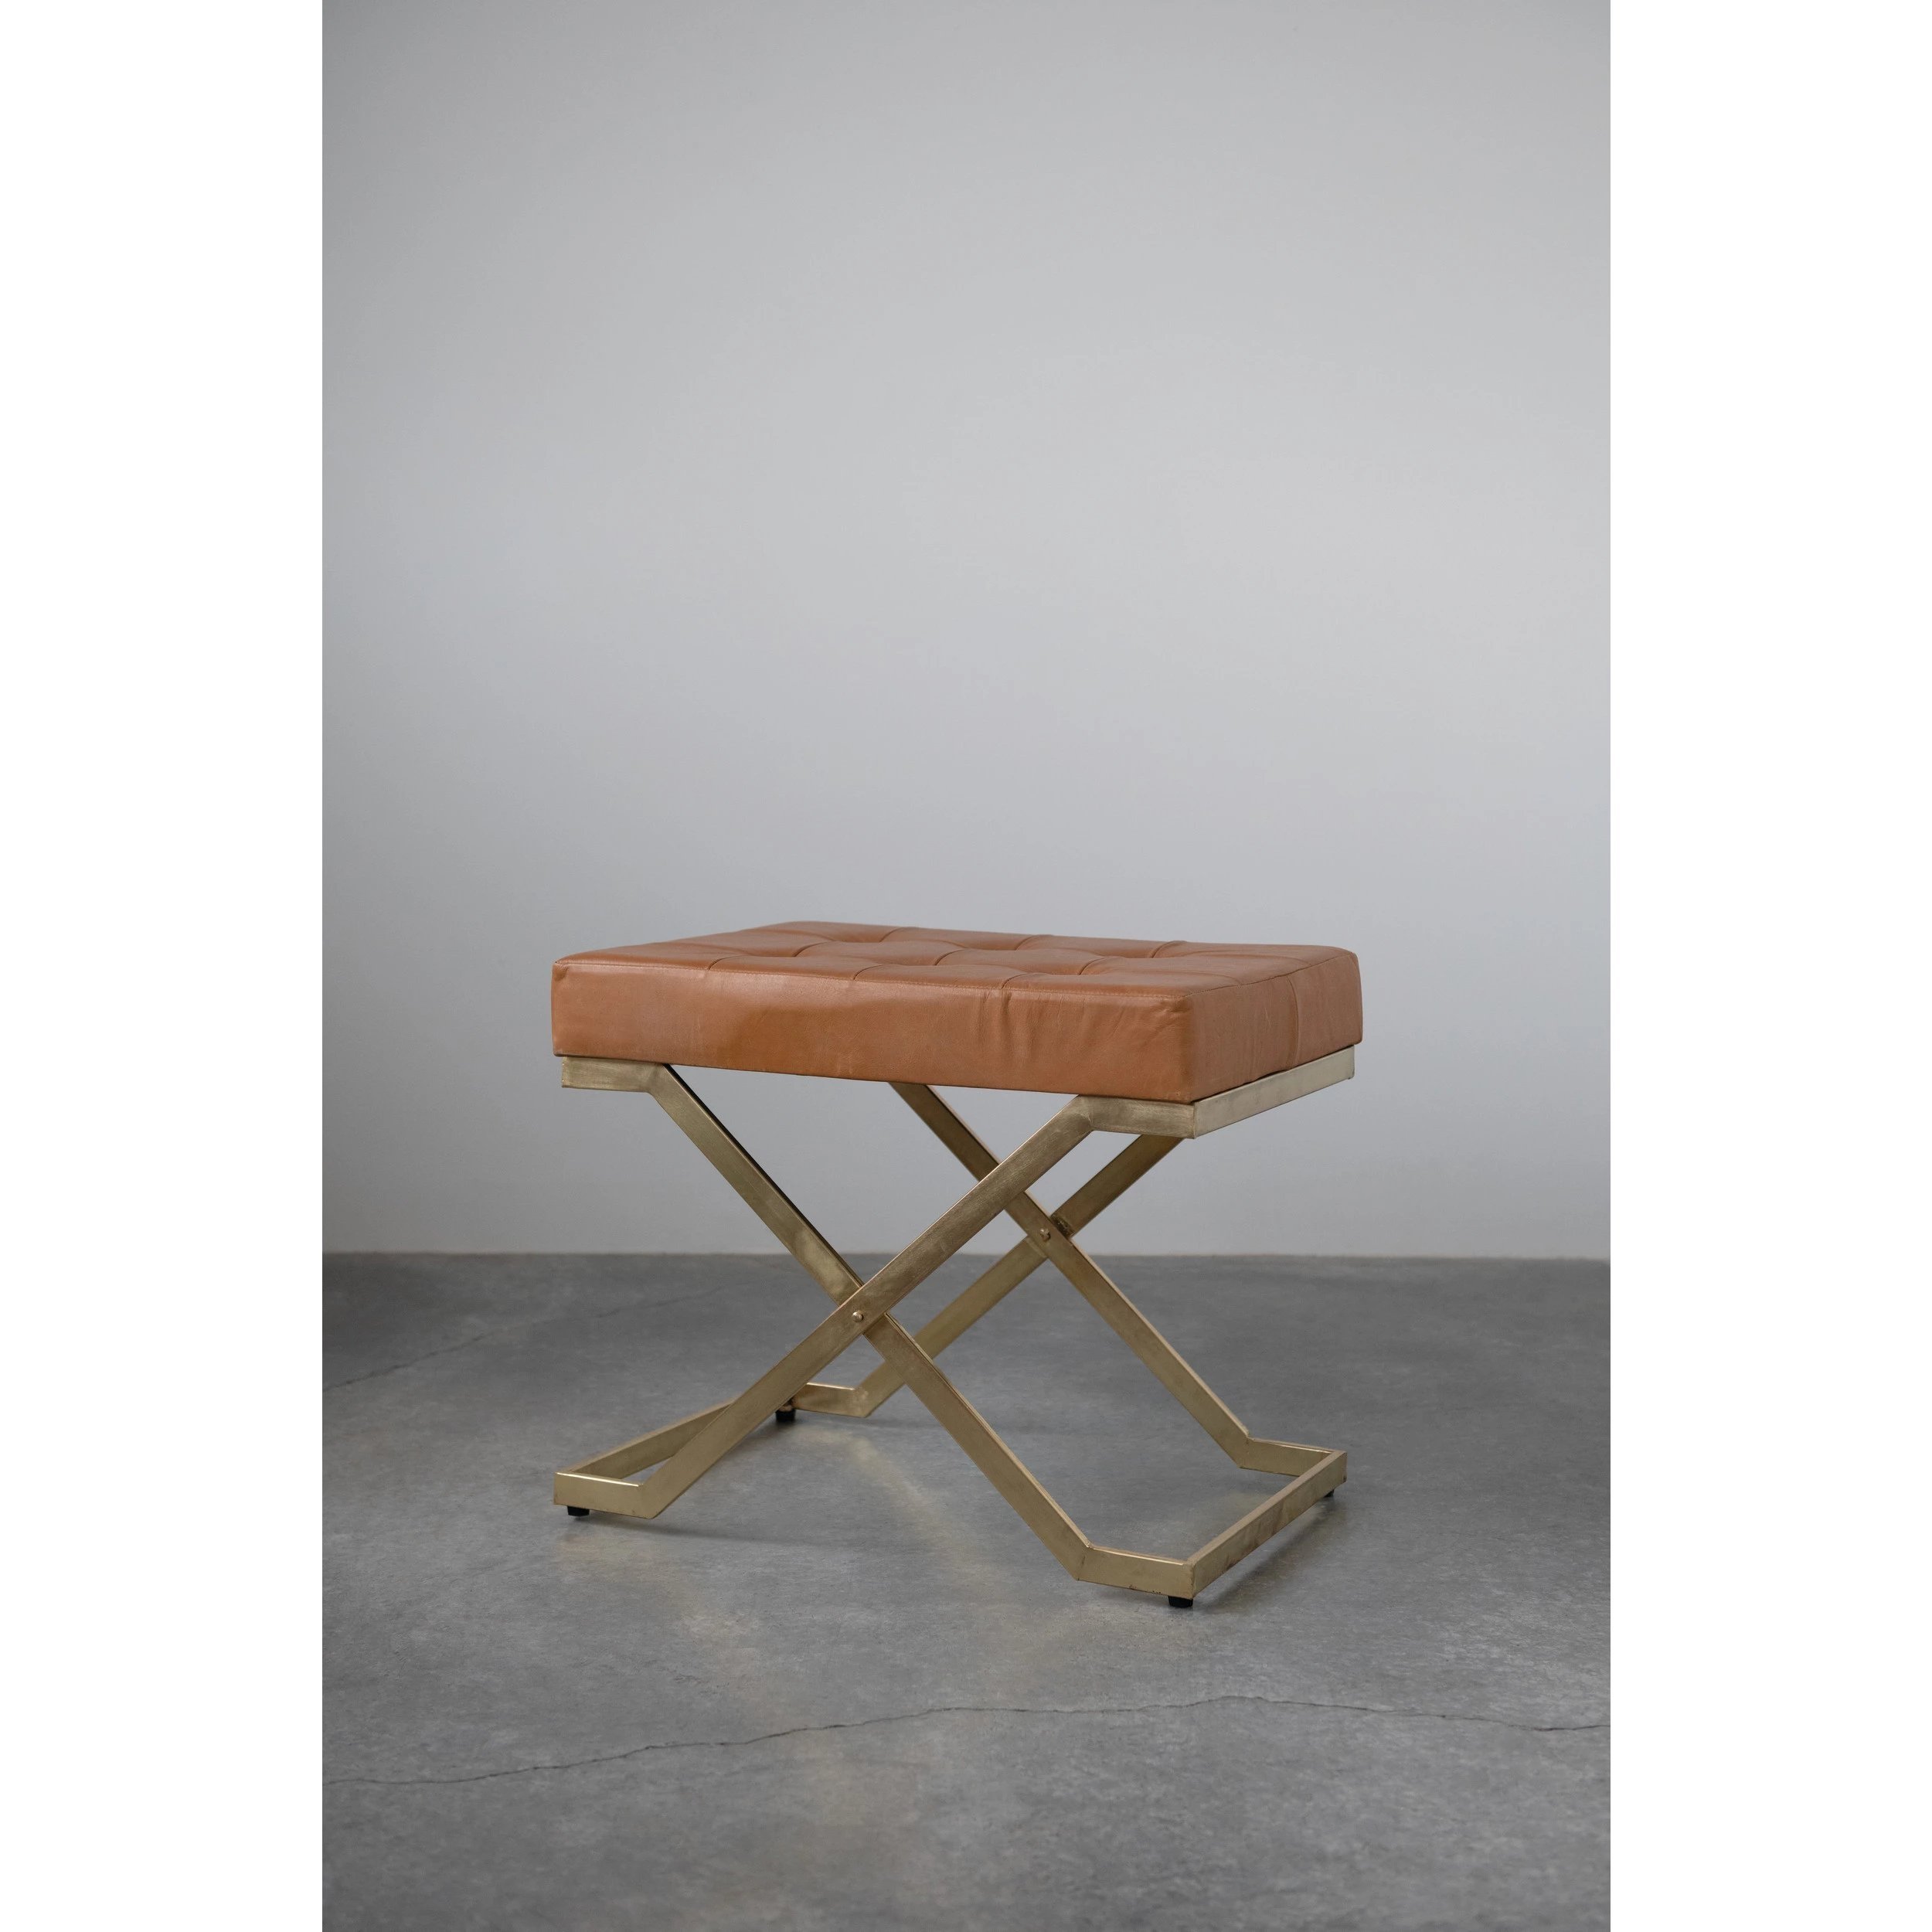 Tufted Leather Stool with Metal Legs - Image 1